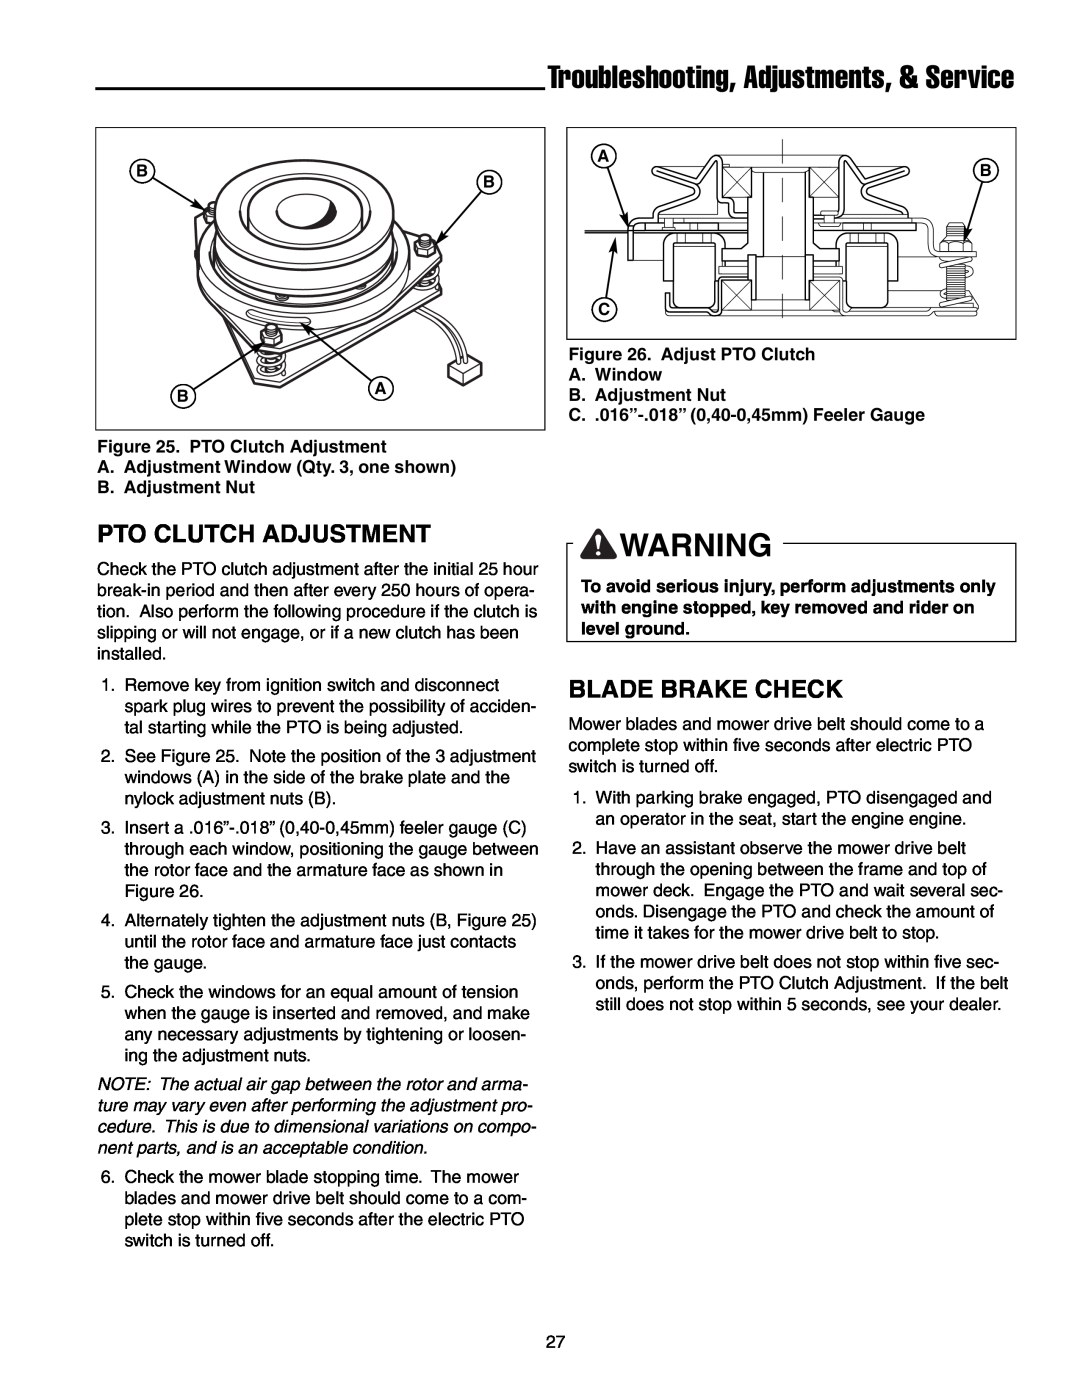 Simplicity 7800072, 7800071 Pto Clutch Adjustment, Blade Brake Check, Troubleshooting, Adjustments, & Service 